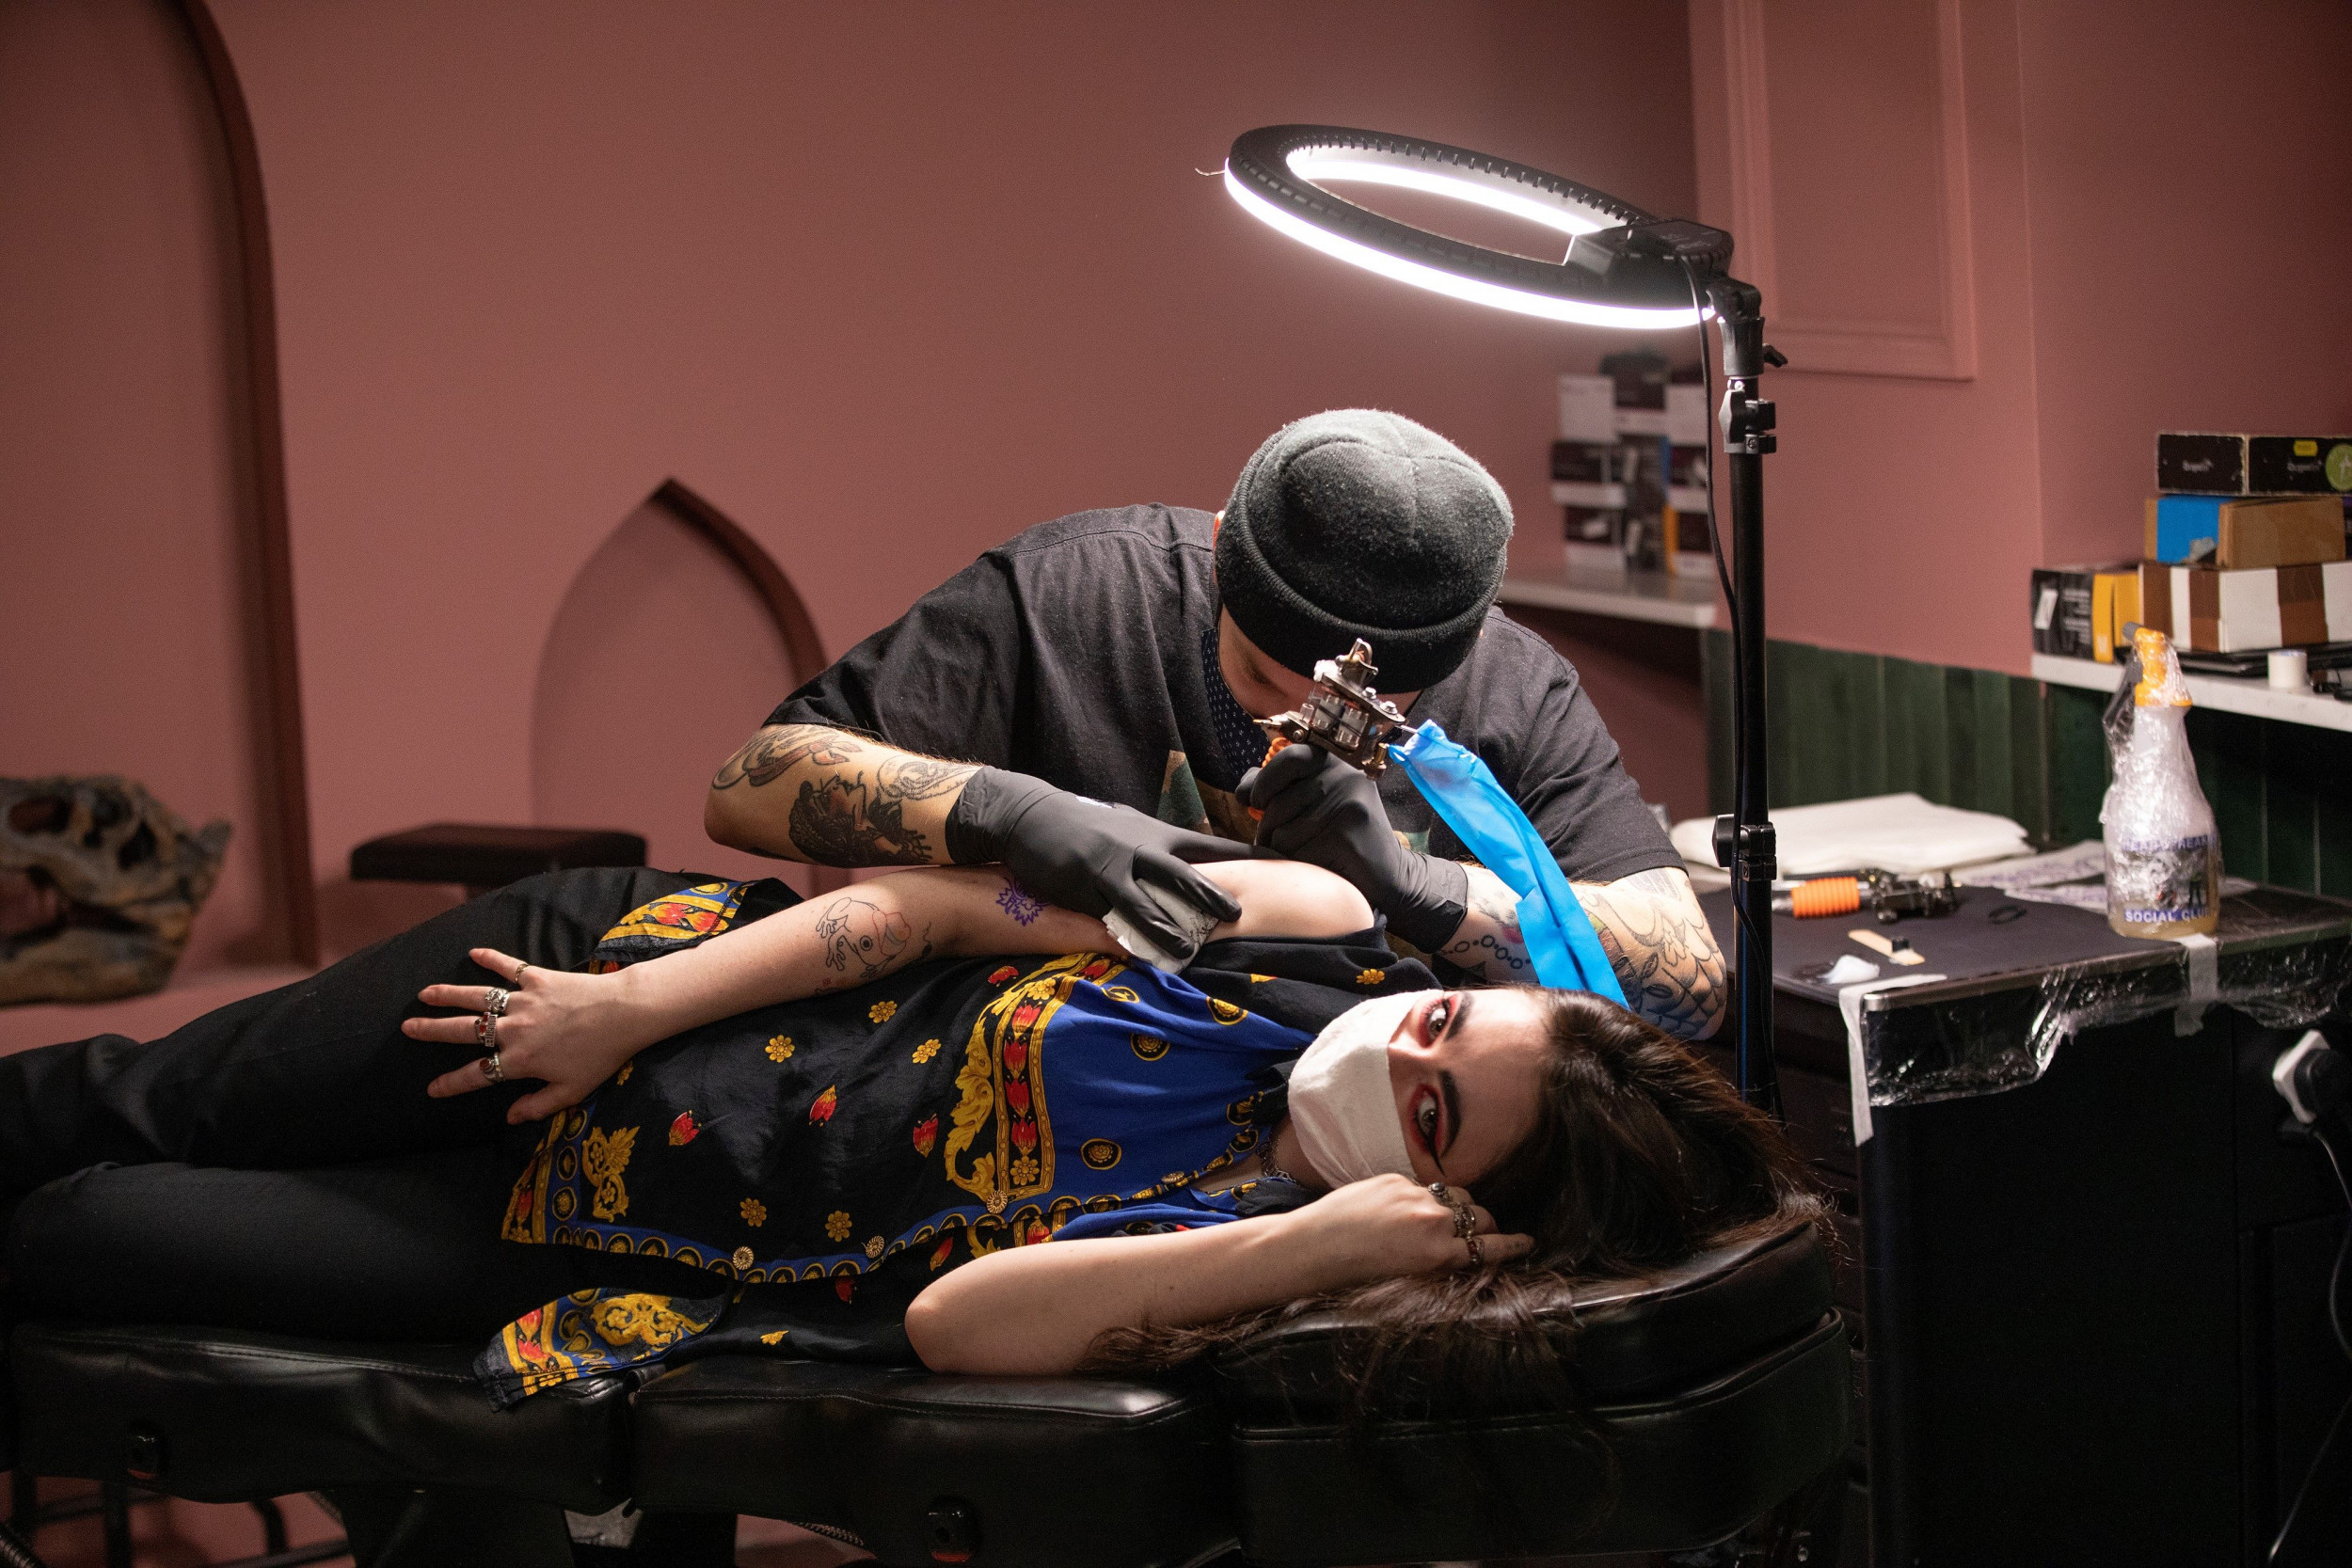 Tattoo Industry Statistics Is the Tattoo Industry Growing